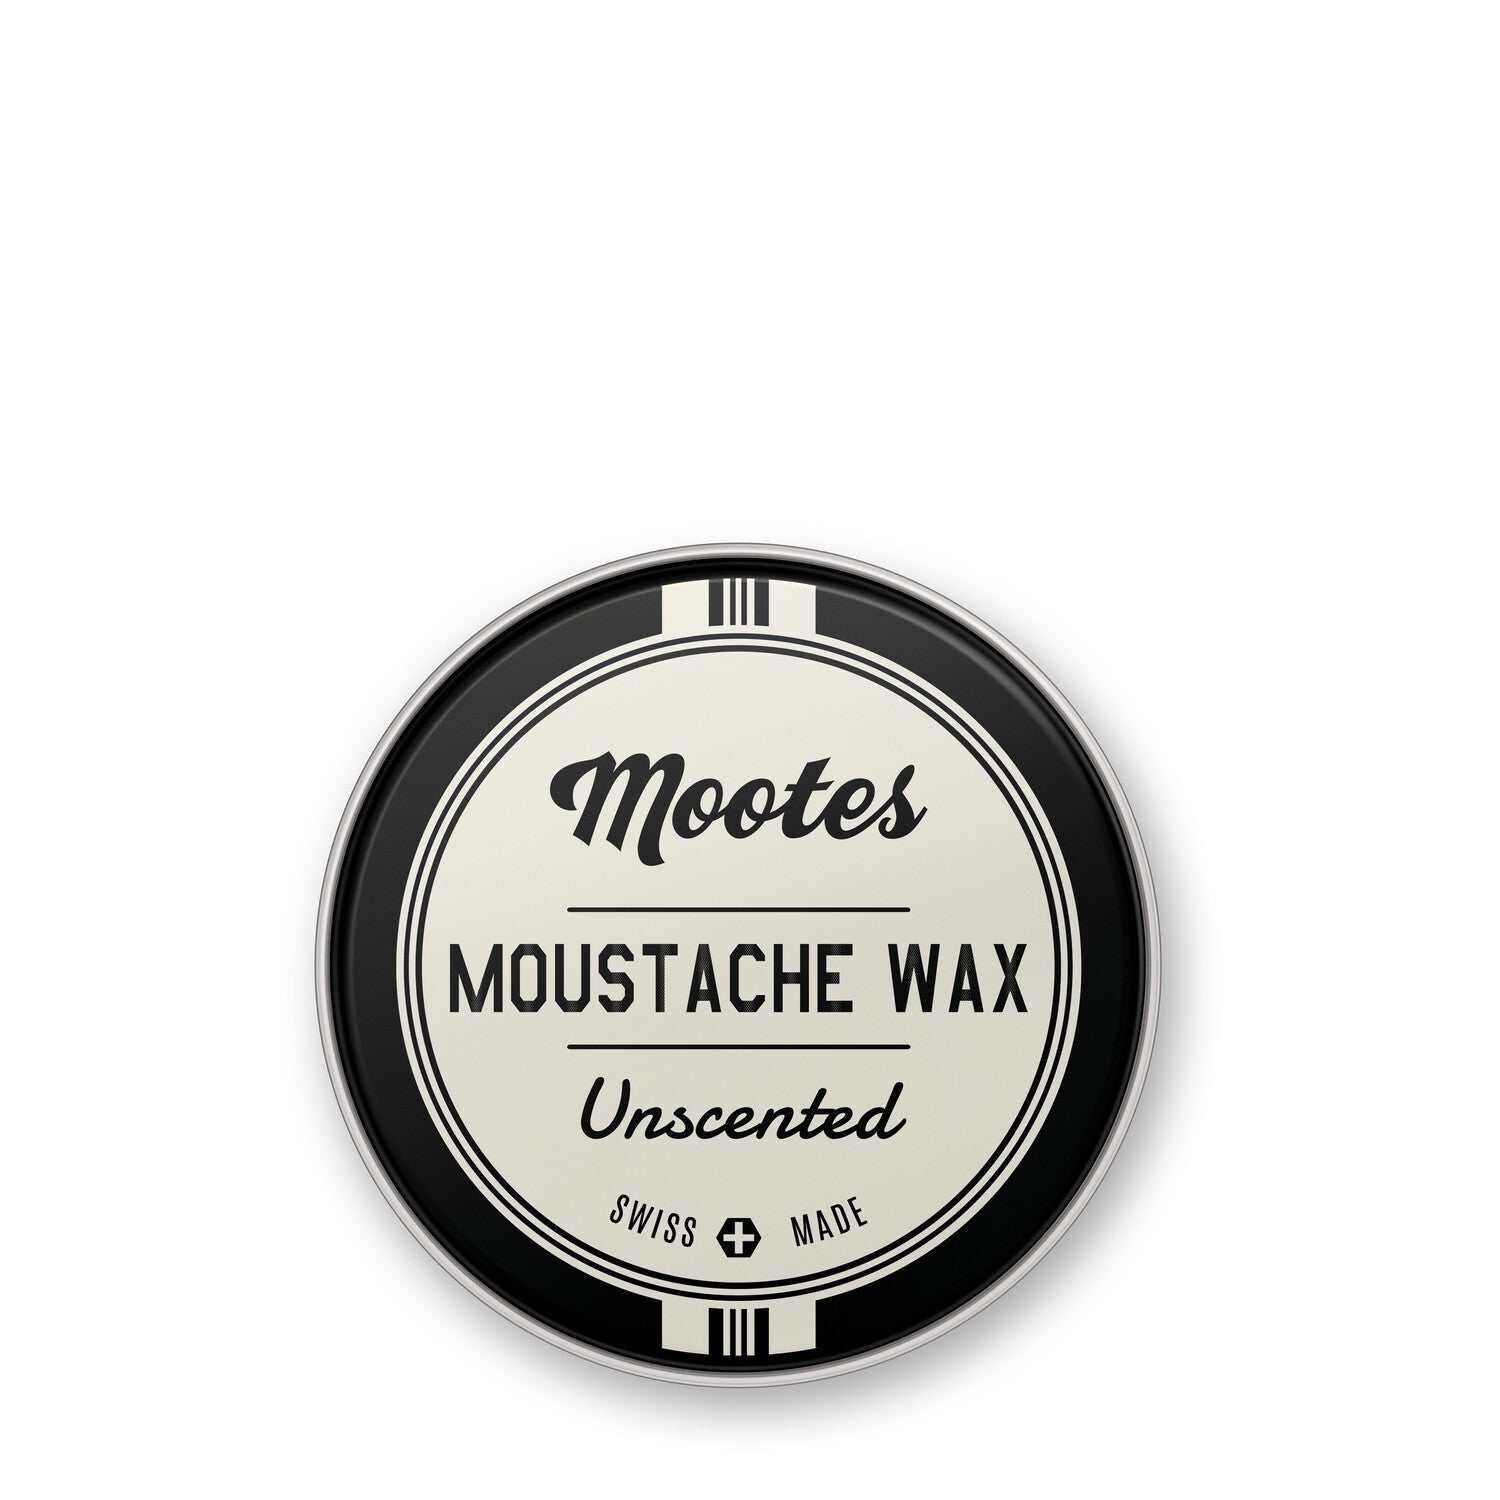 Mootes Moustache Wax Unscented